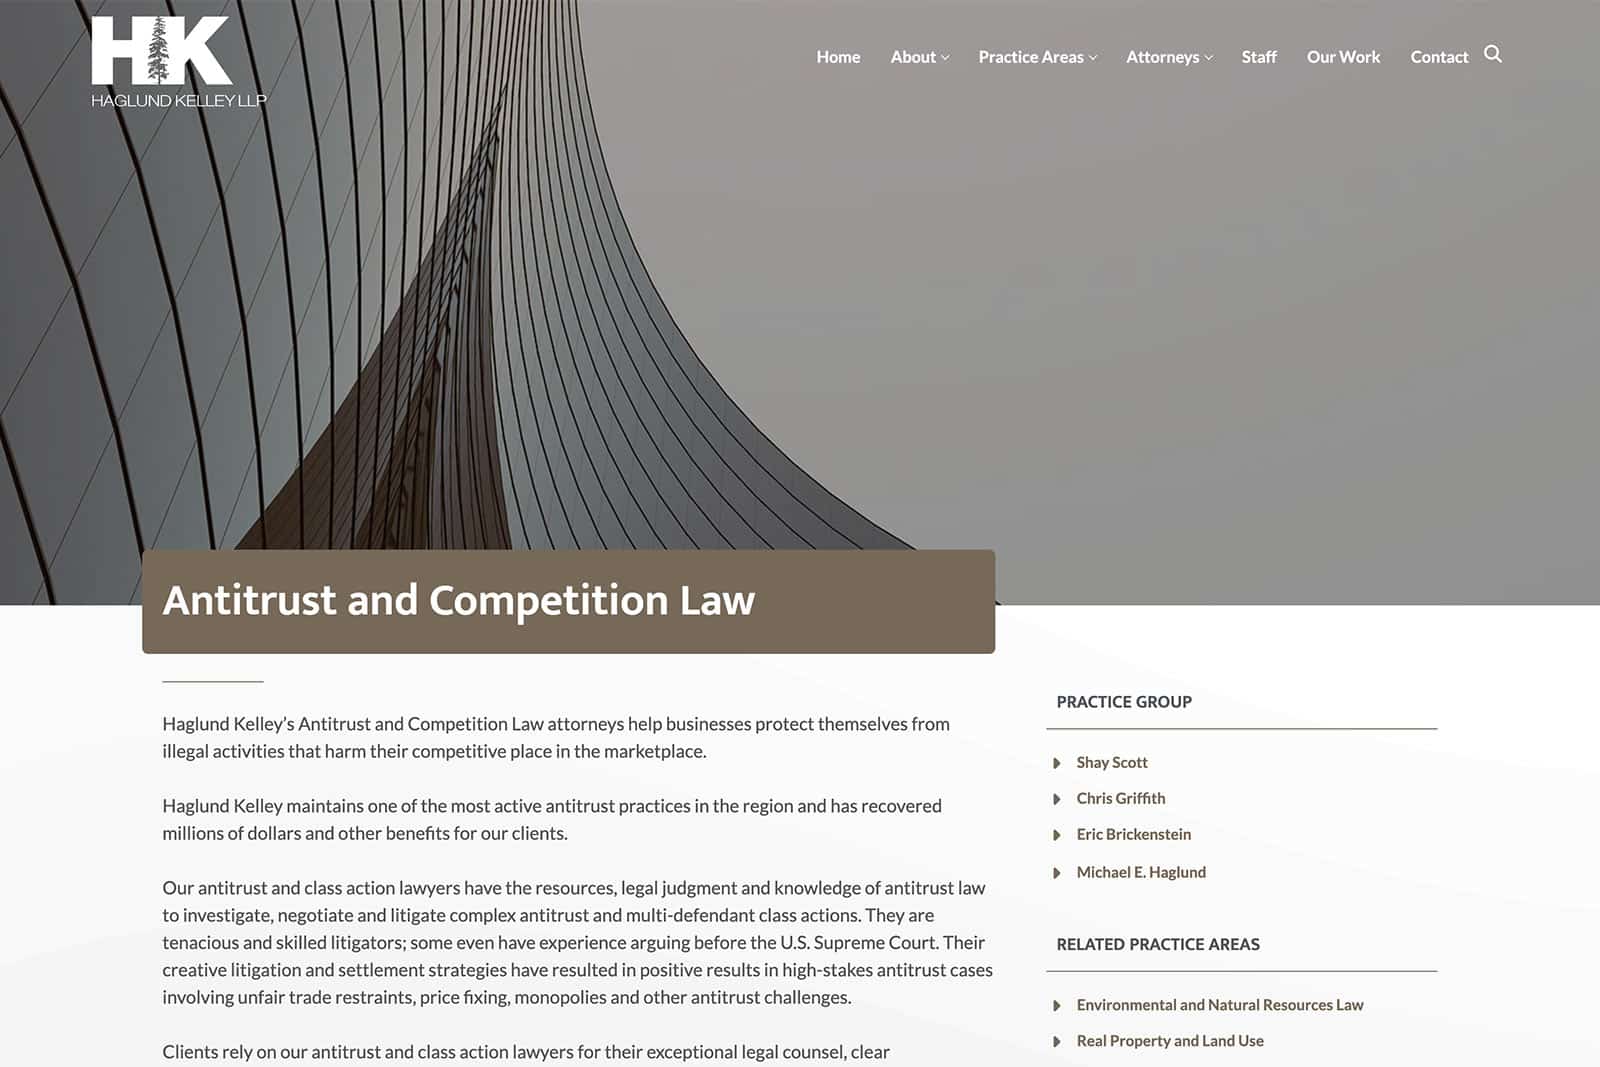 Screenshot of Haglund Kelley LLP - Example of Law Firm Web Design - Practice Area Page